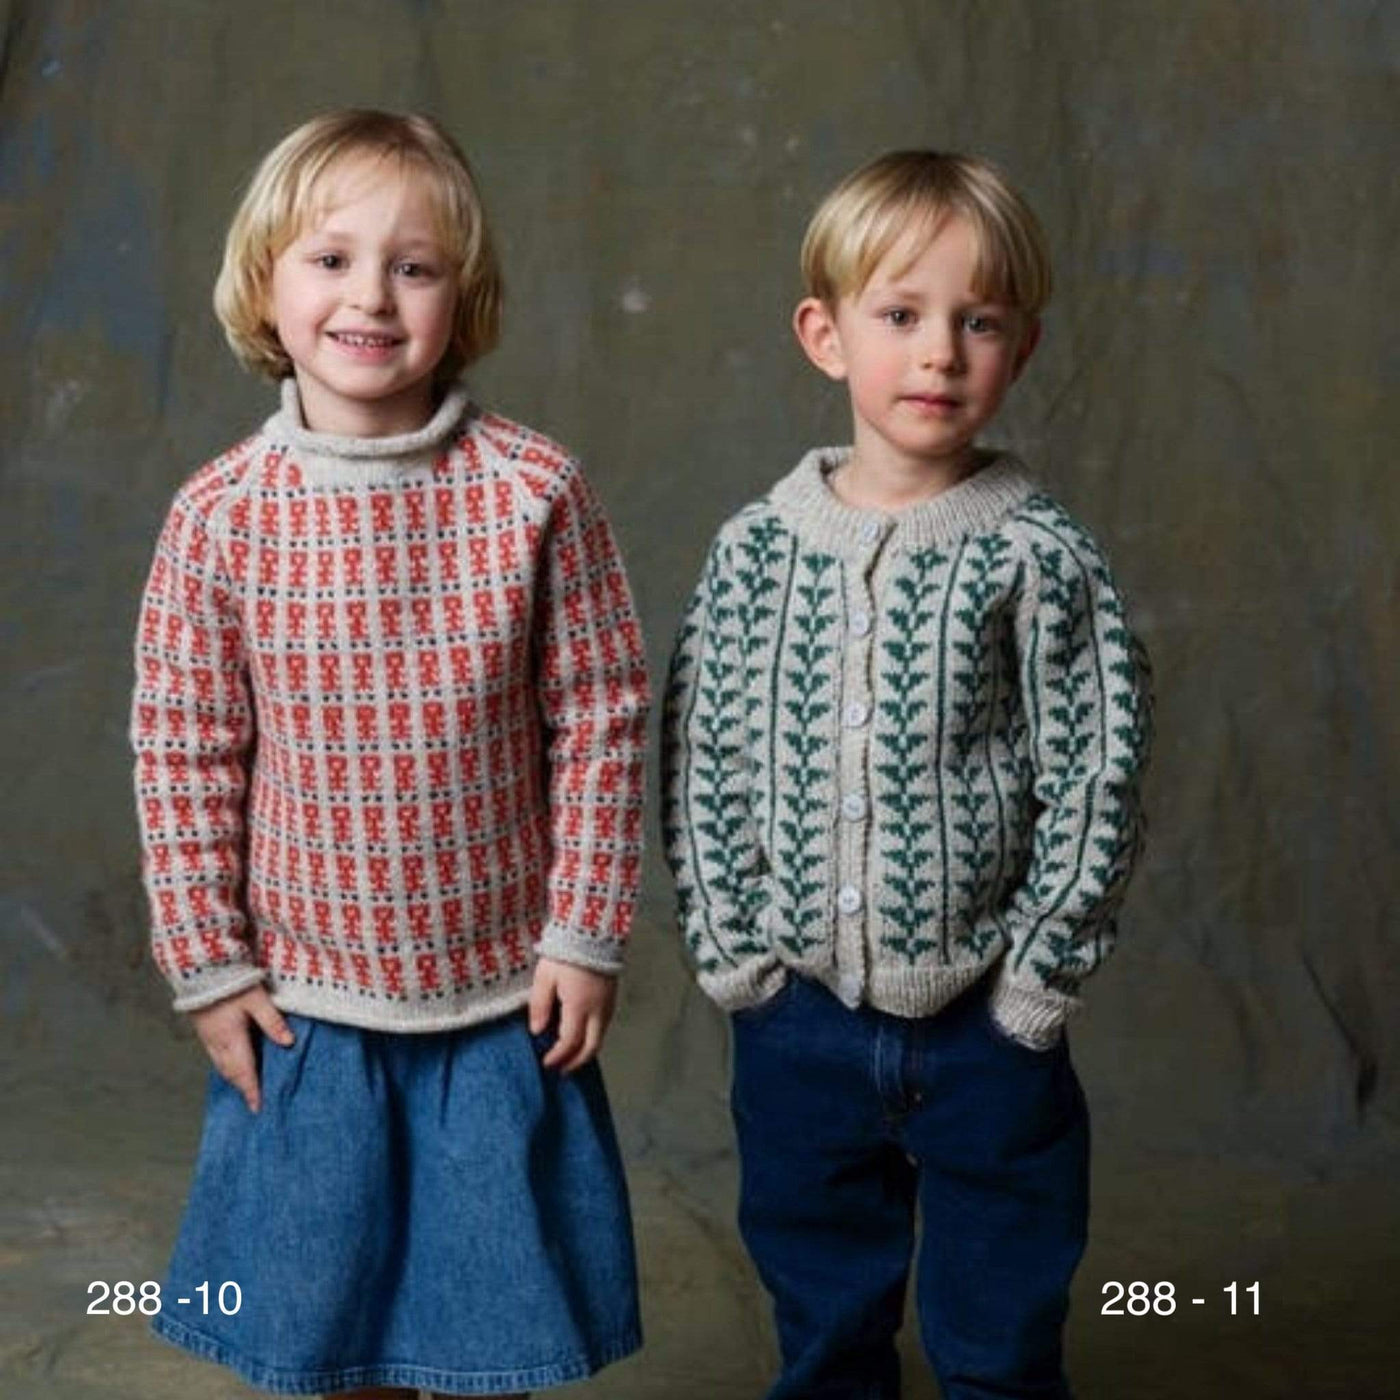 Two children wearing overall colorwork patterns sweaters. Patterns 288-10 and 288-11 are shown.